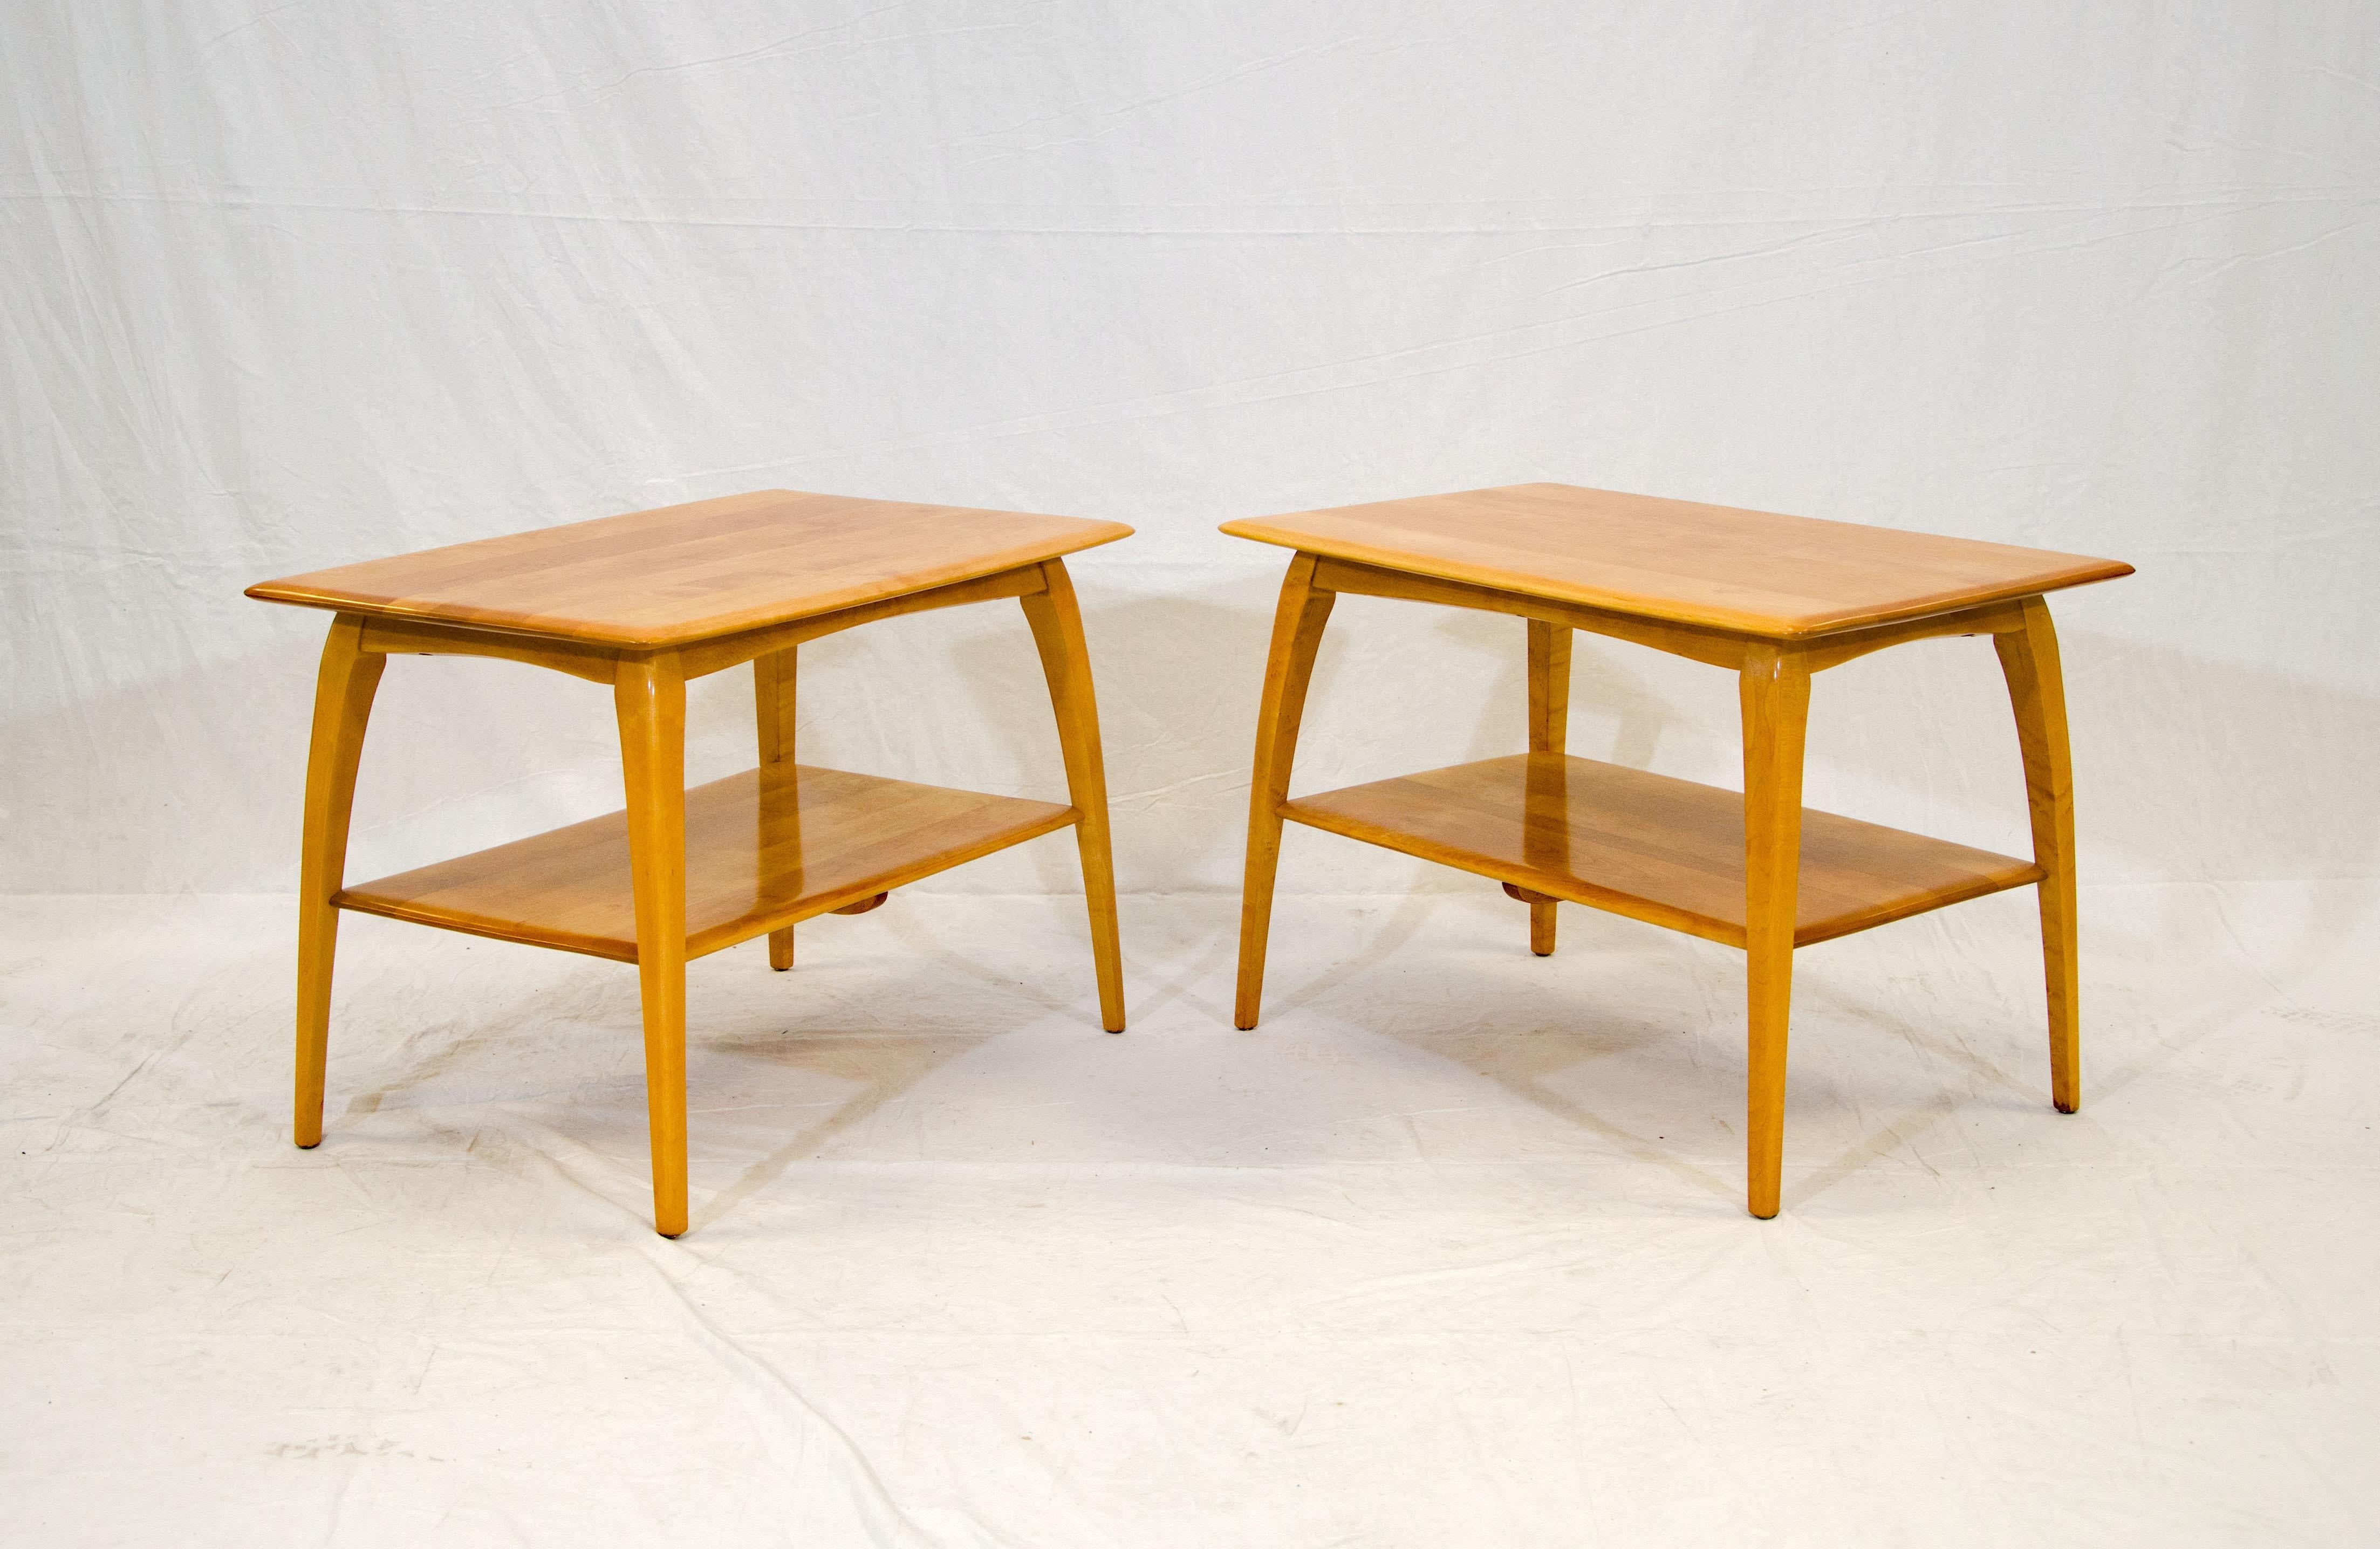 Nice pair of Heywood Wakefield end tables to use beside a sofa or next to a pair of lounge chairs. The second shelf measures about 9 1/2